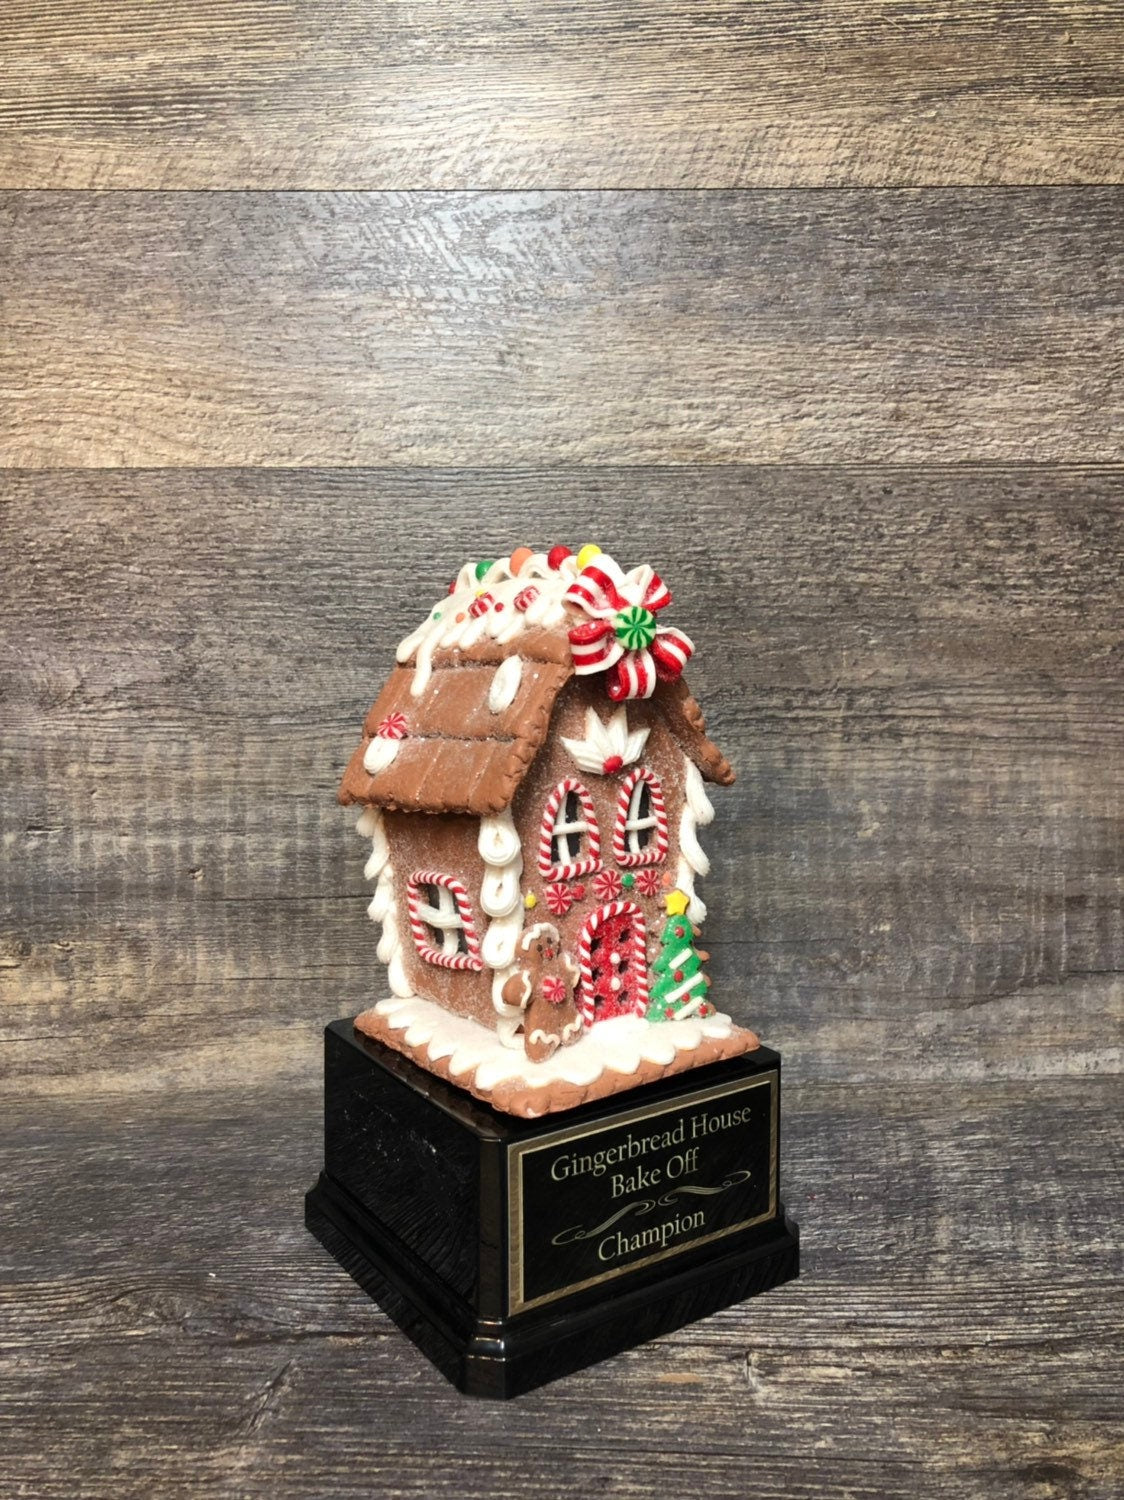 Gingerbread House Cookie Bake Off Trophy 8" Med Size Ugly Sweater Trophy Contest Award Christmas Holiday Party Cookie Santa Christmas Decor